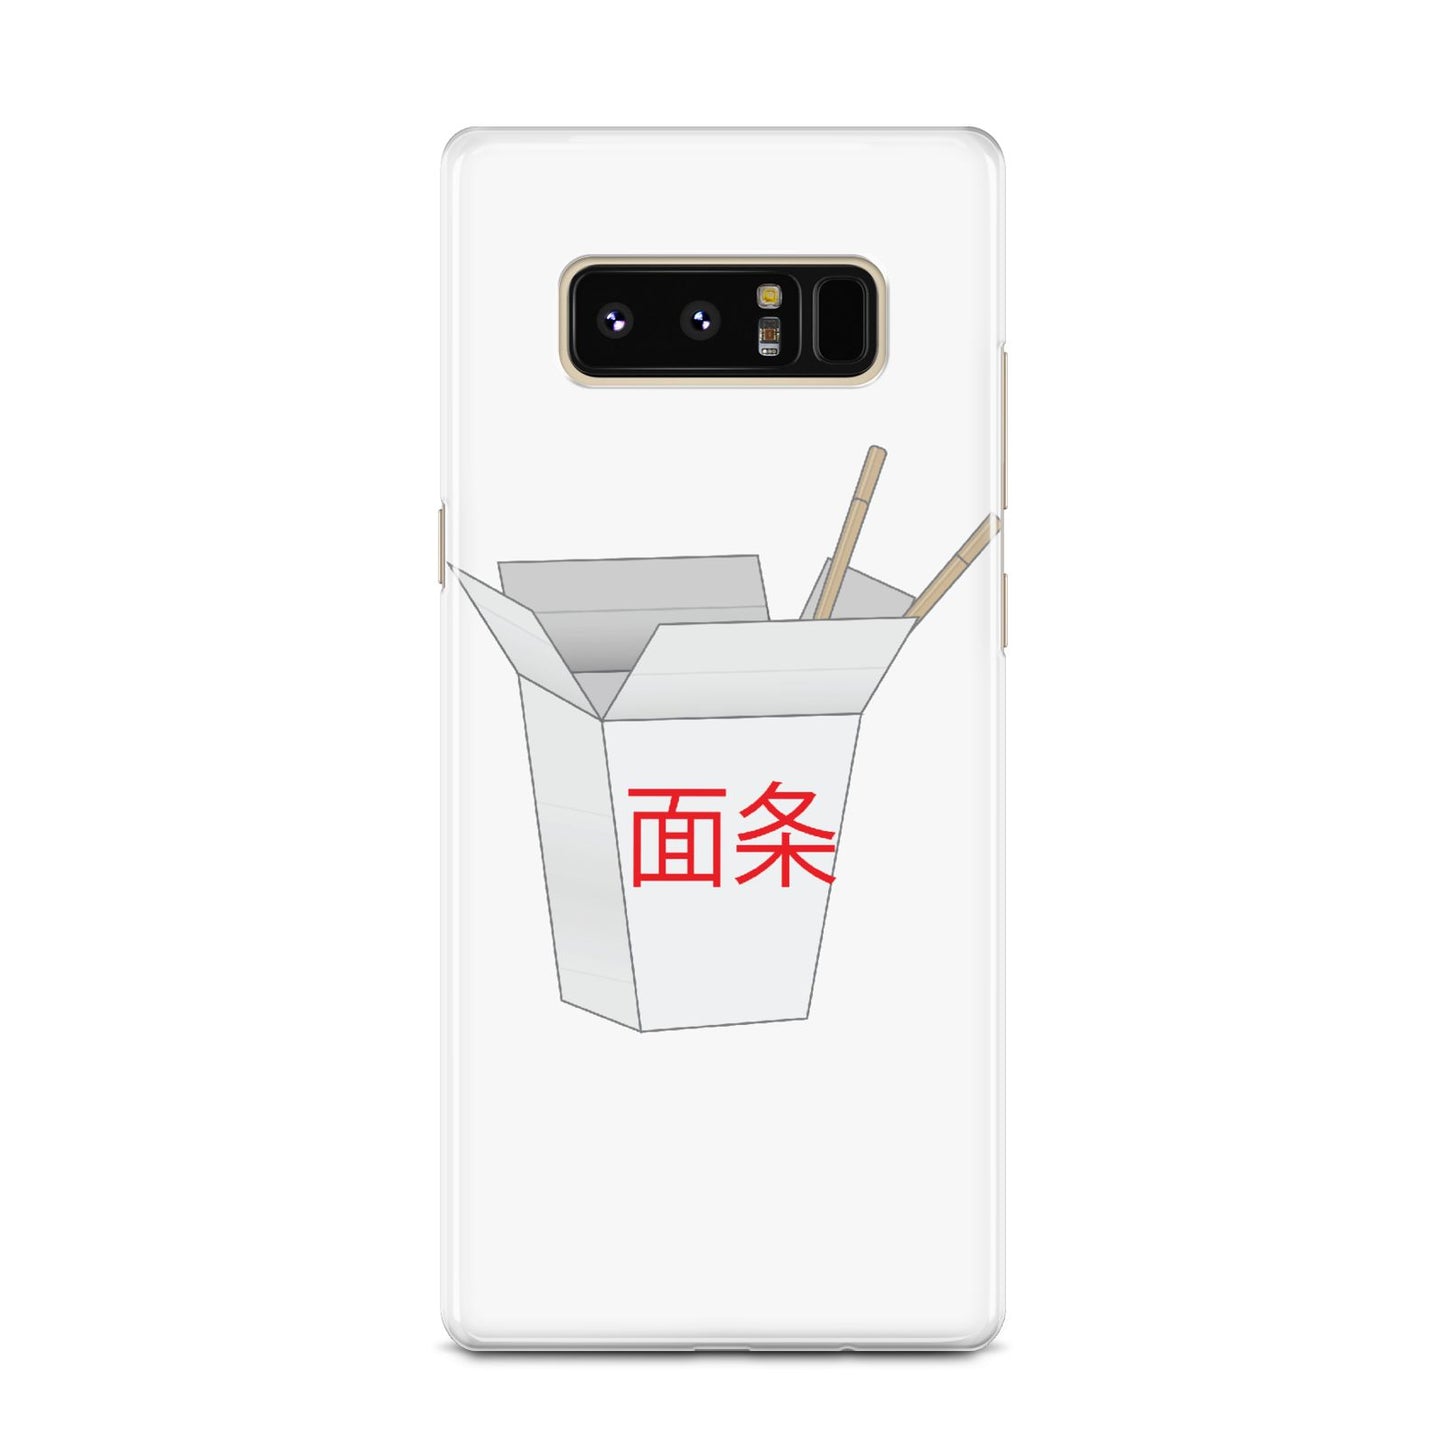 Chinese Takeaway Box Samsung Galaxy Note 8 Case